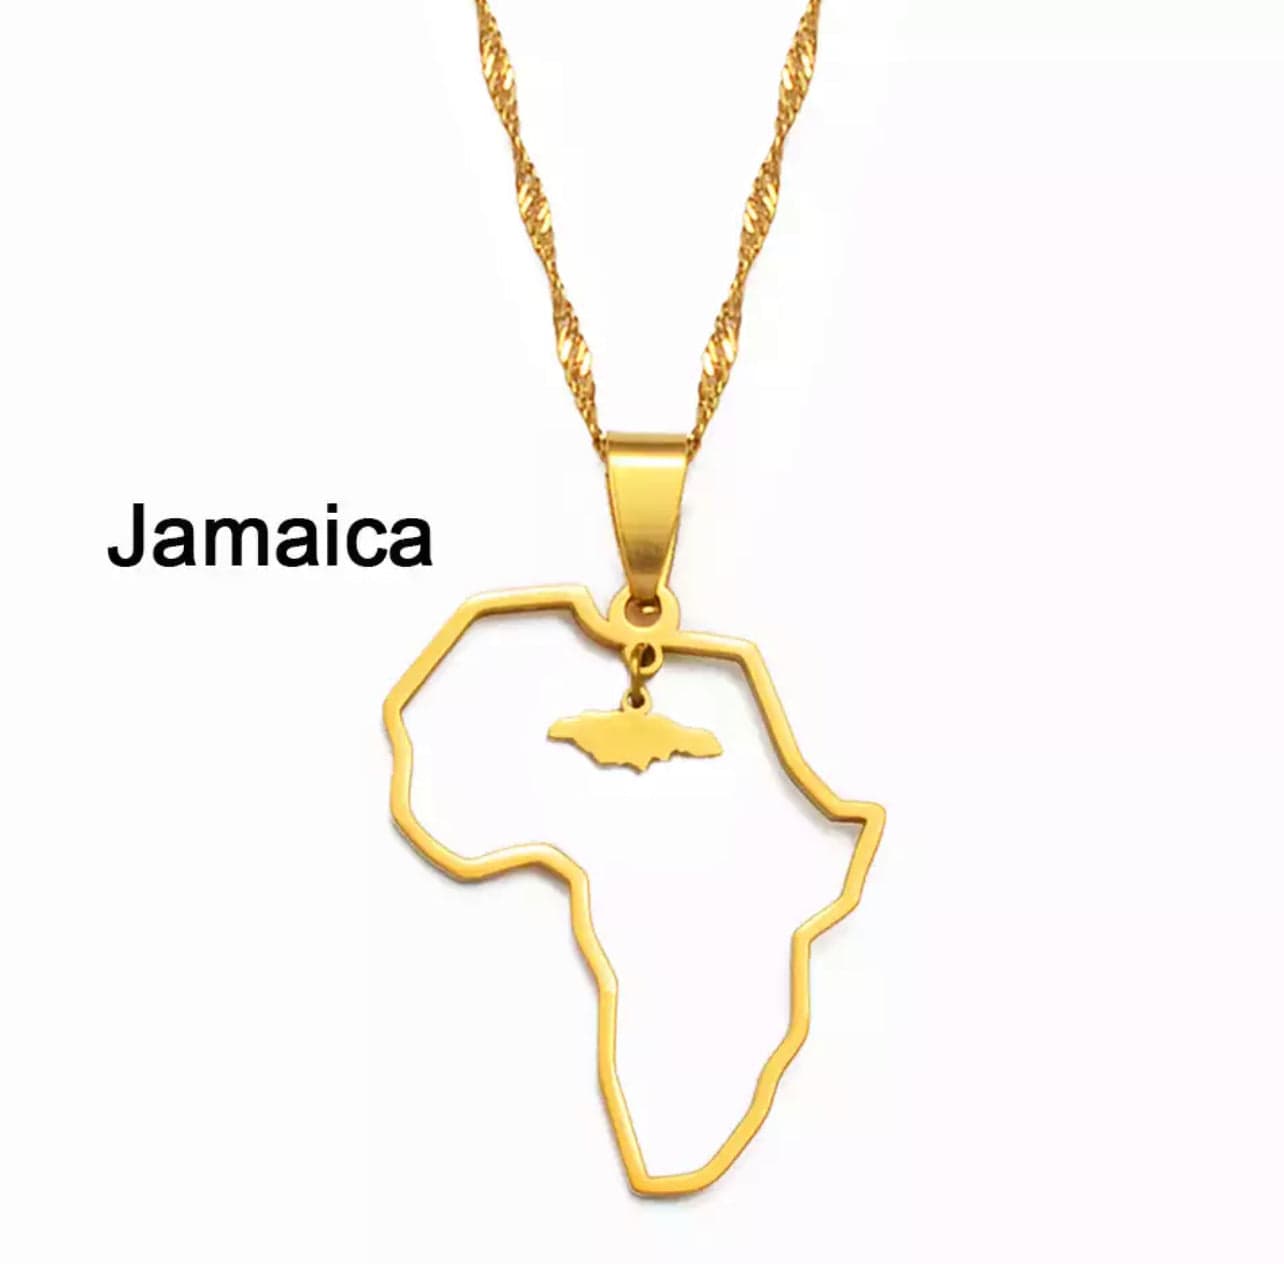 Veryldesigns Necklace Jamaica Custom African country Necklace